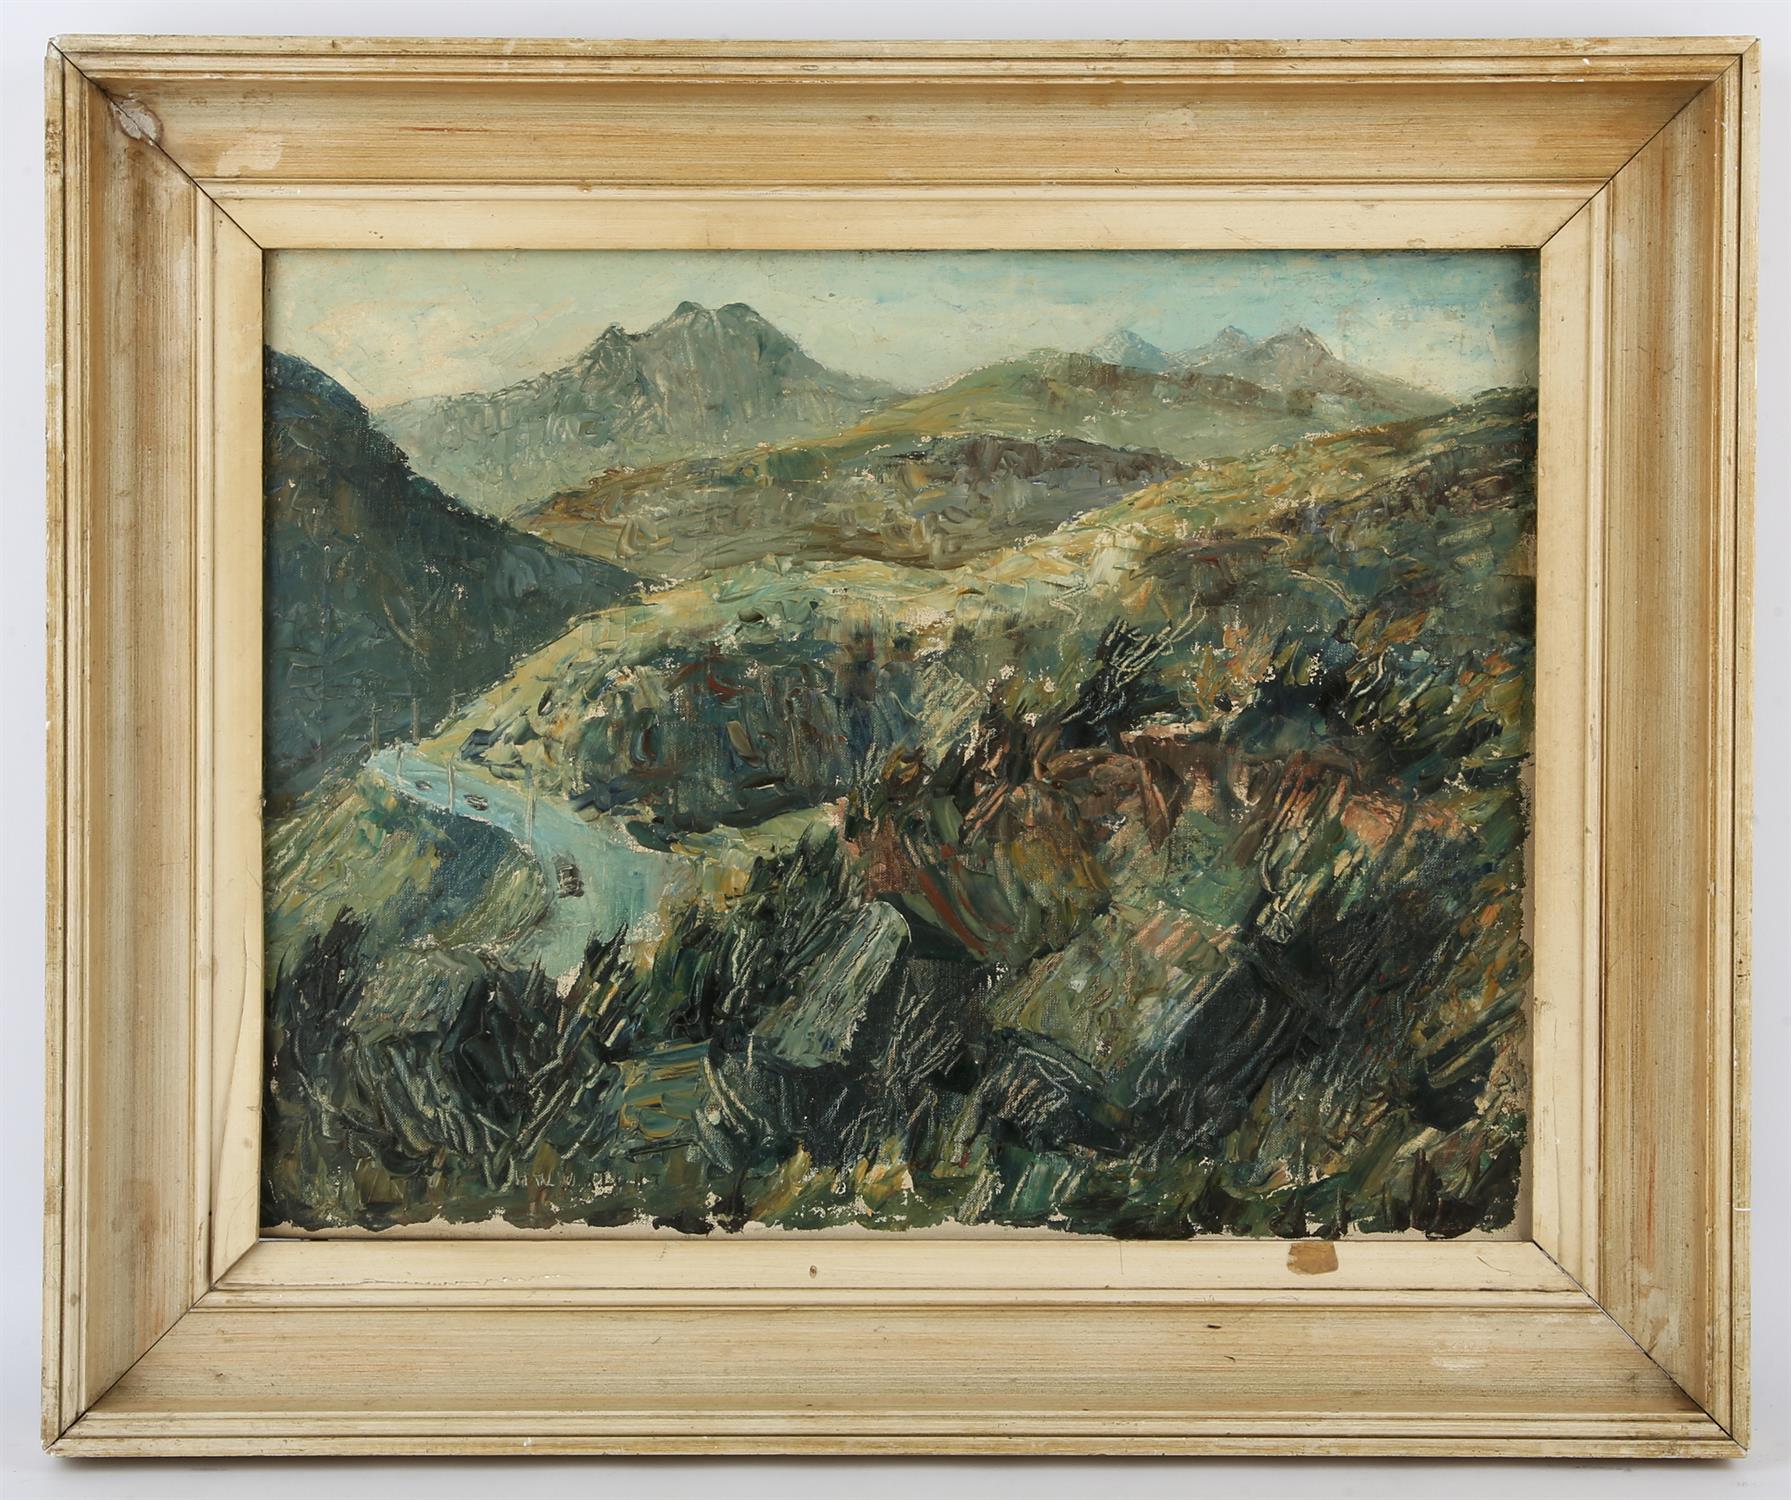 Herbert William Wright (20th century), Snowdon from Gylder Fach, oil on canvas,signed lower left, - Image 2 of 3